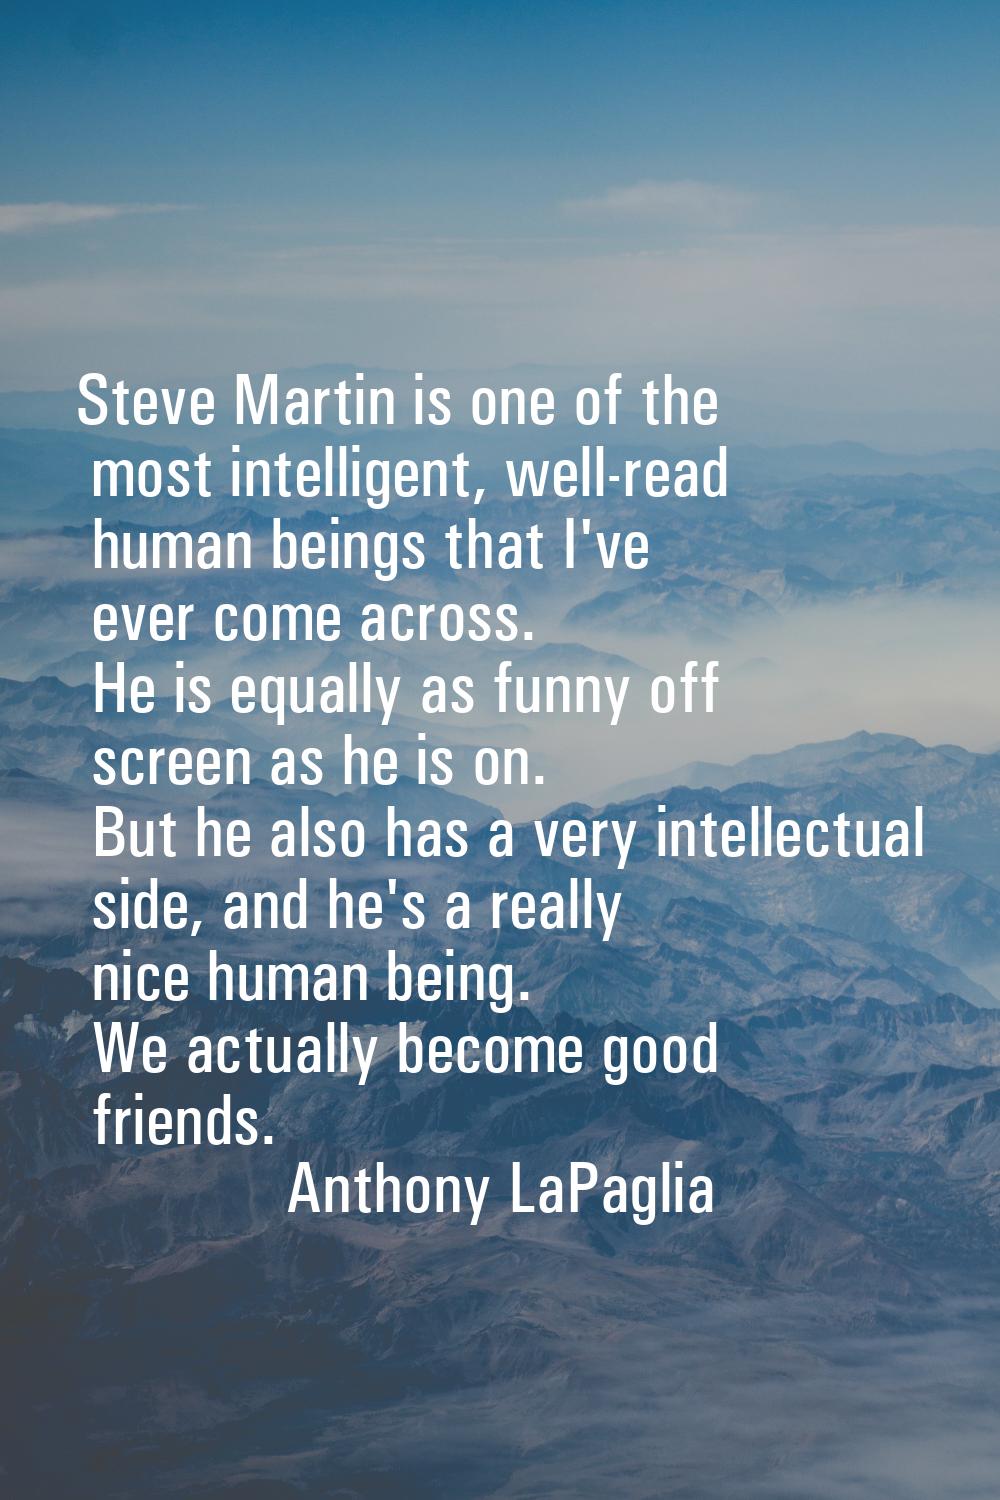 Steve Martin is one of the most intelligent, well-read human beings that I've ever come across. He 